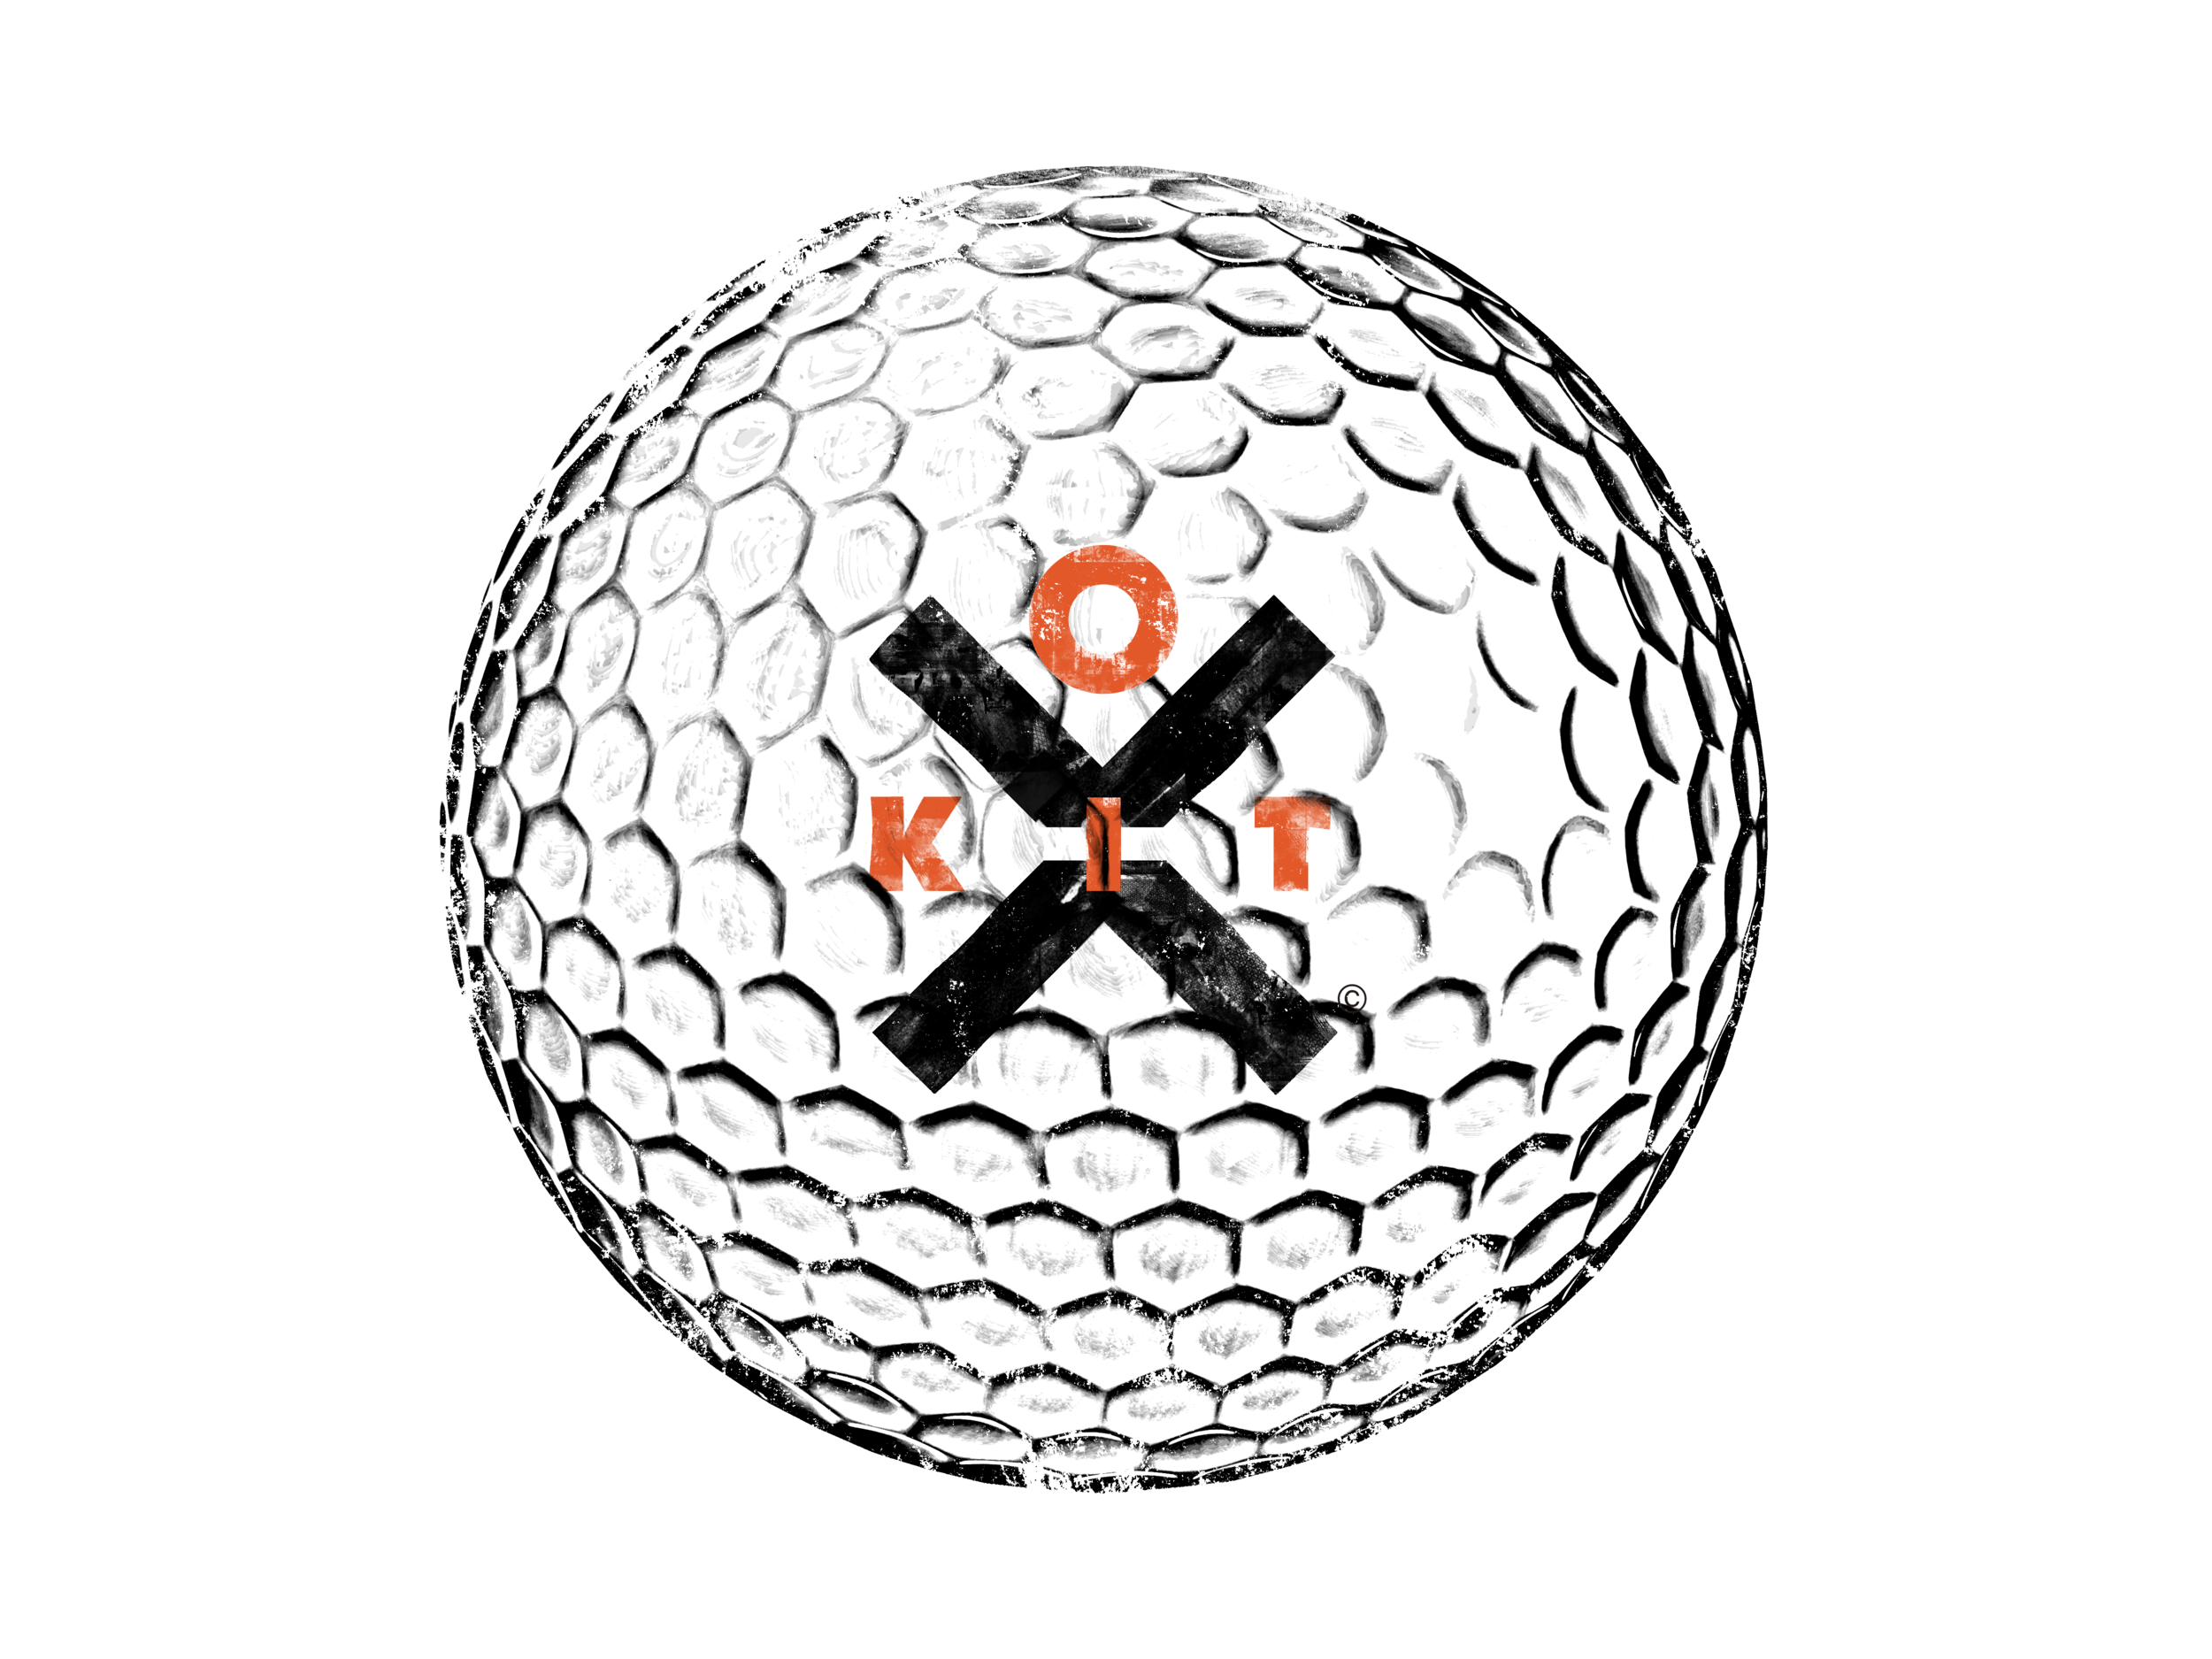 Park Golf Ball Background PNG Image